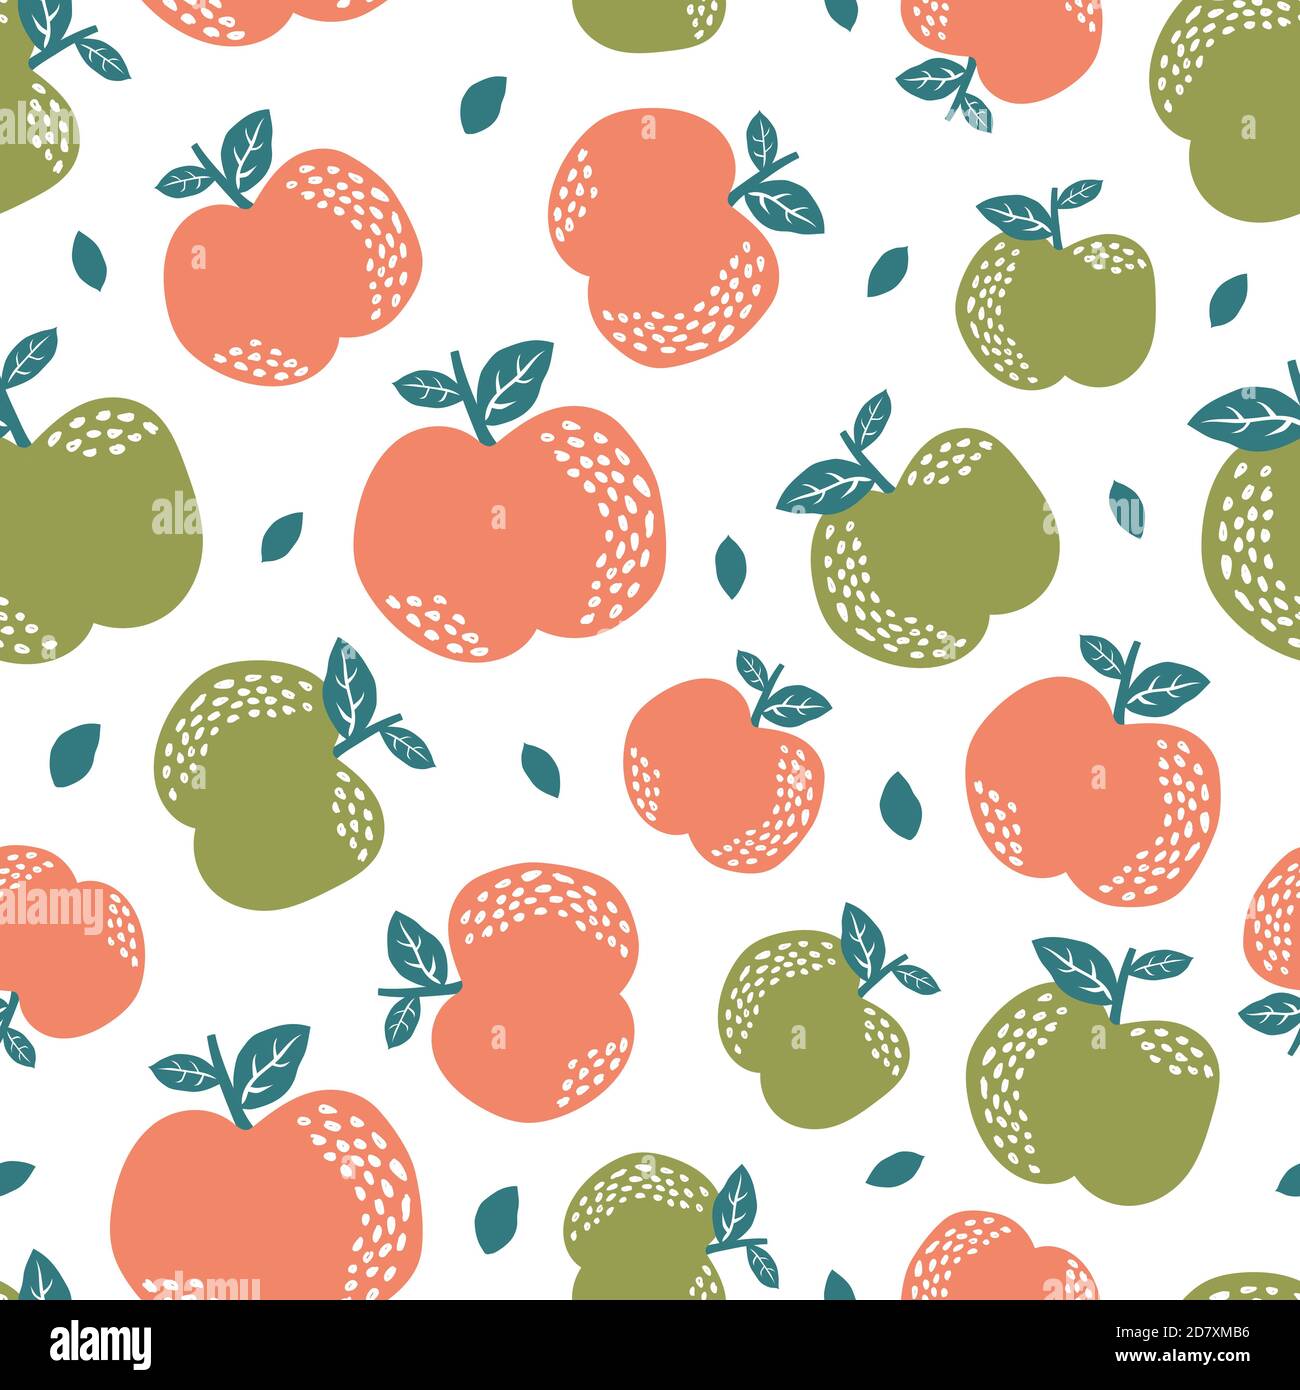 Seamless pattern with cute apple Stock Vector